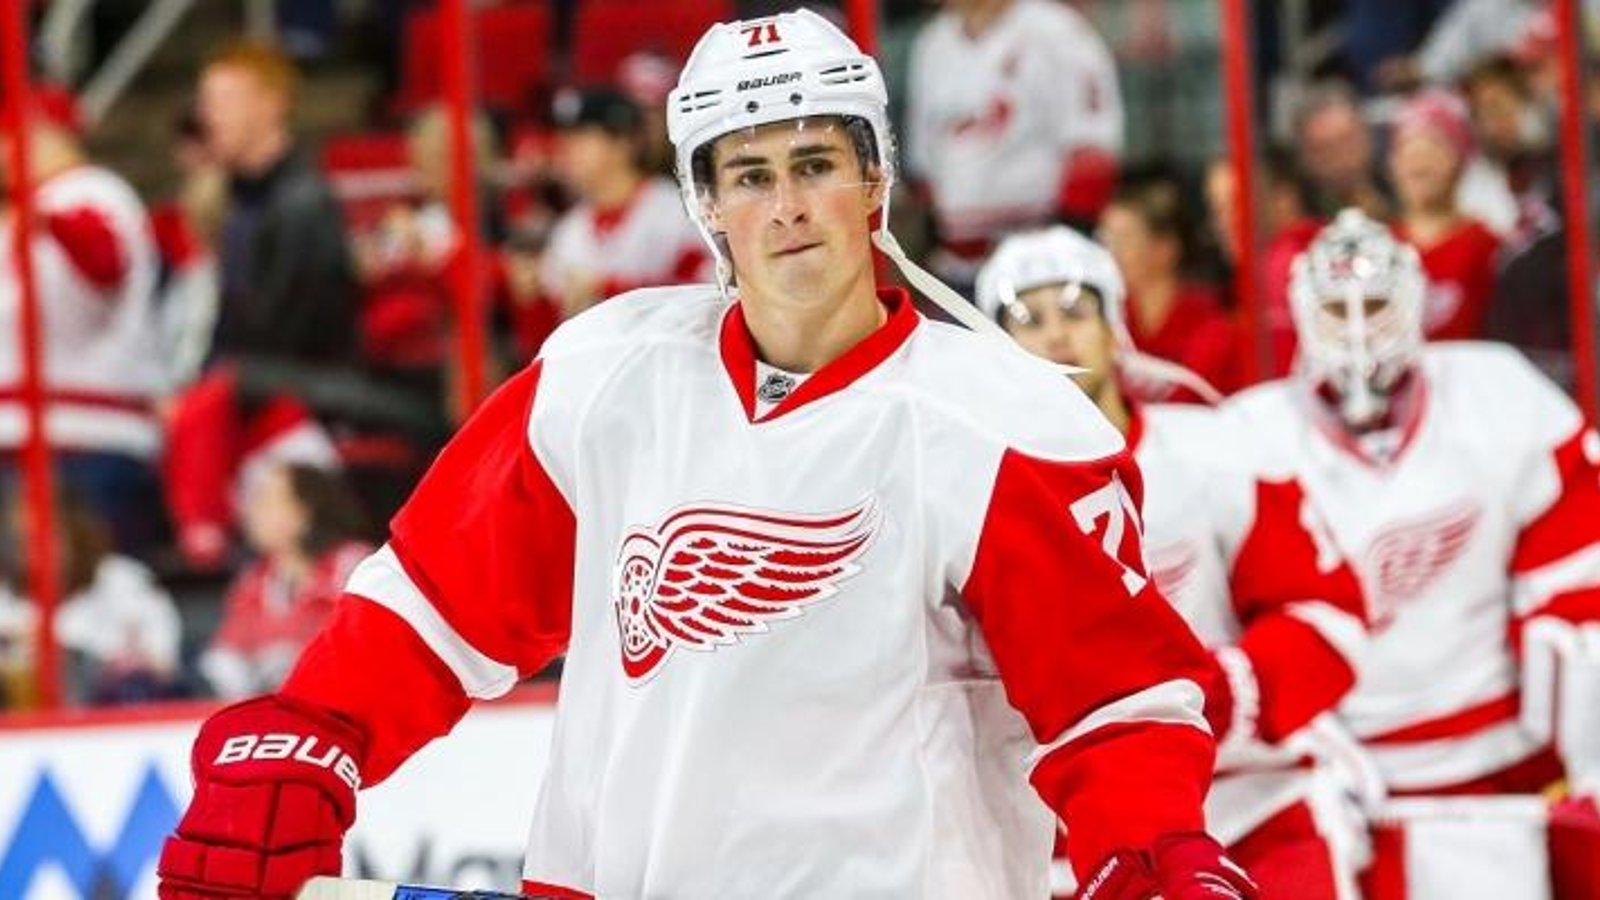 Dylan Larkin has just set a new record in the skills competition.